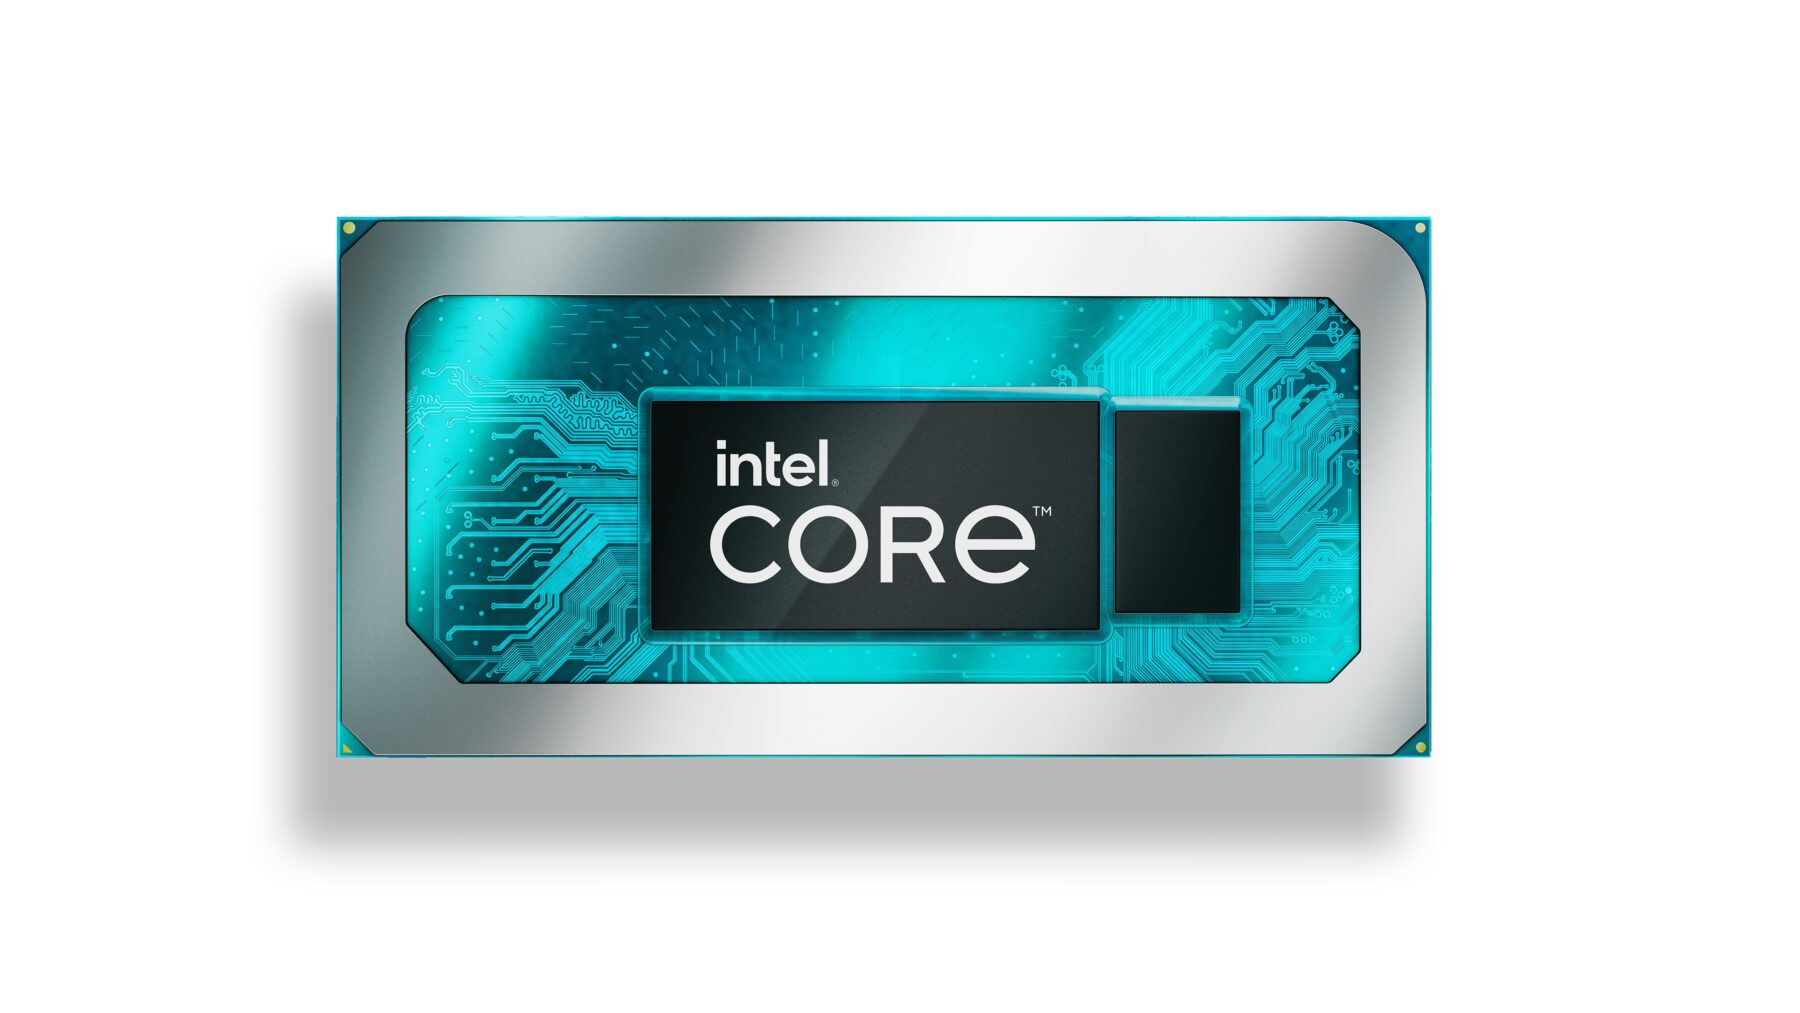 Intel Extends Performance Leadership with World's Fastest Mobile Processor - returnal